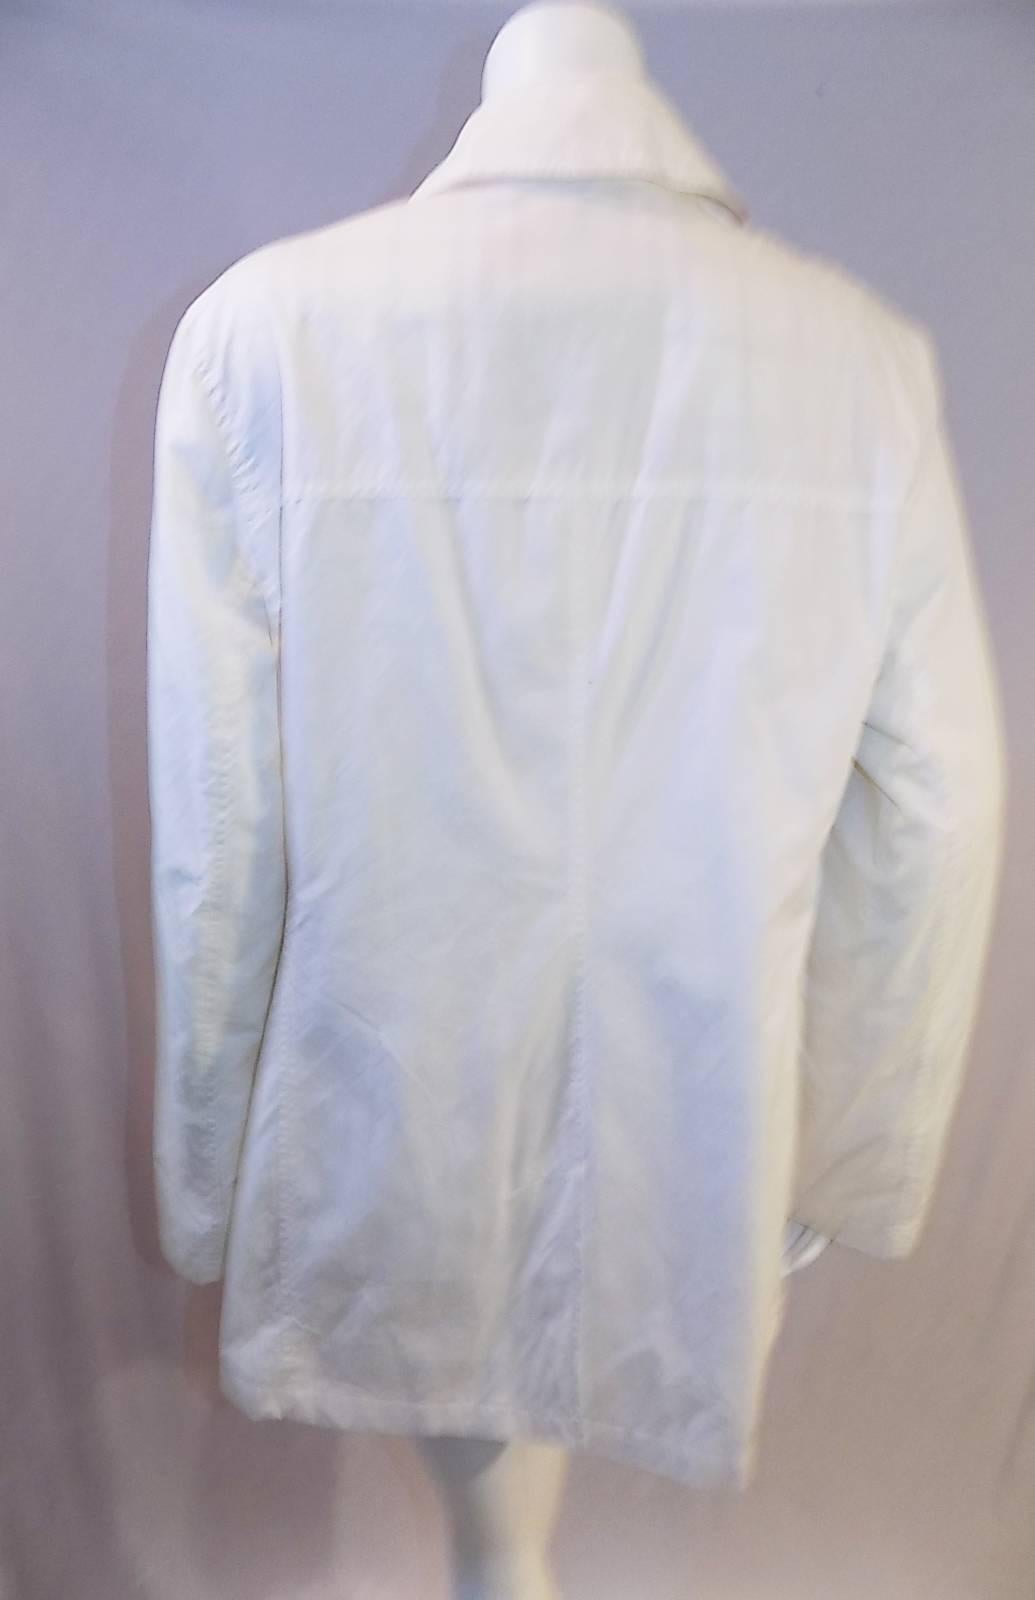 Burberry white w novacheck lining rain jacket In Excellent Condition For Sale In New York, NY